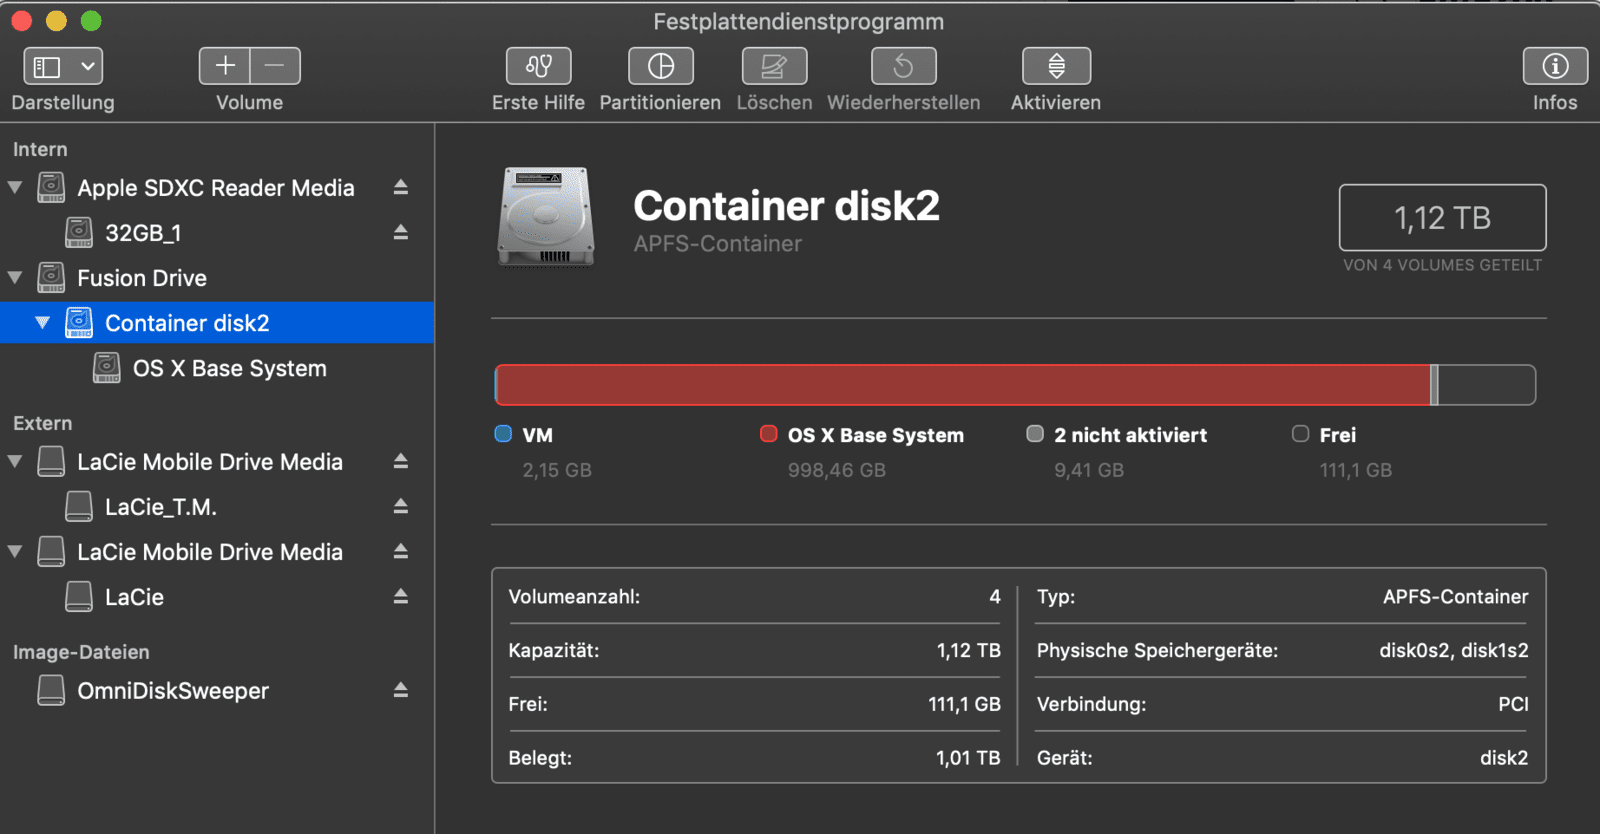 APFS-Container_1TB_belegt.png